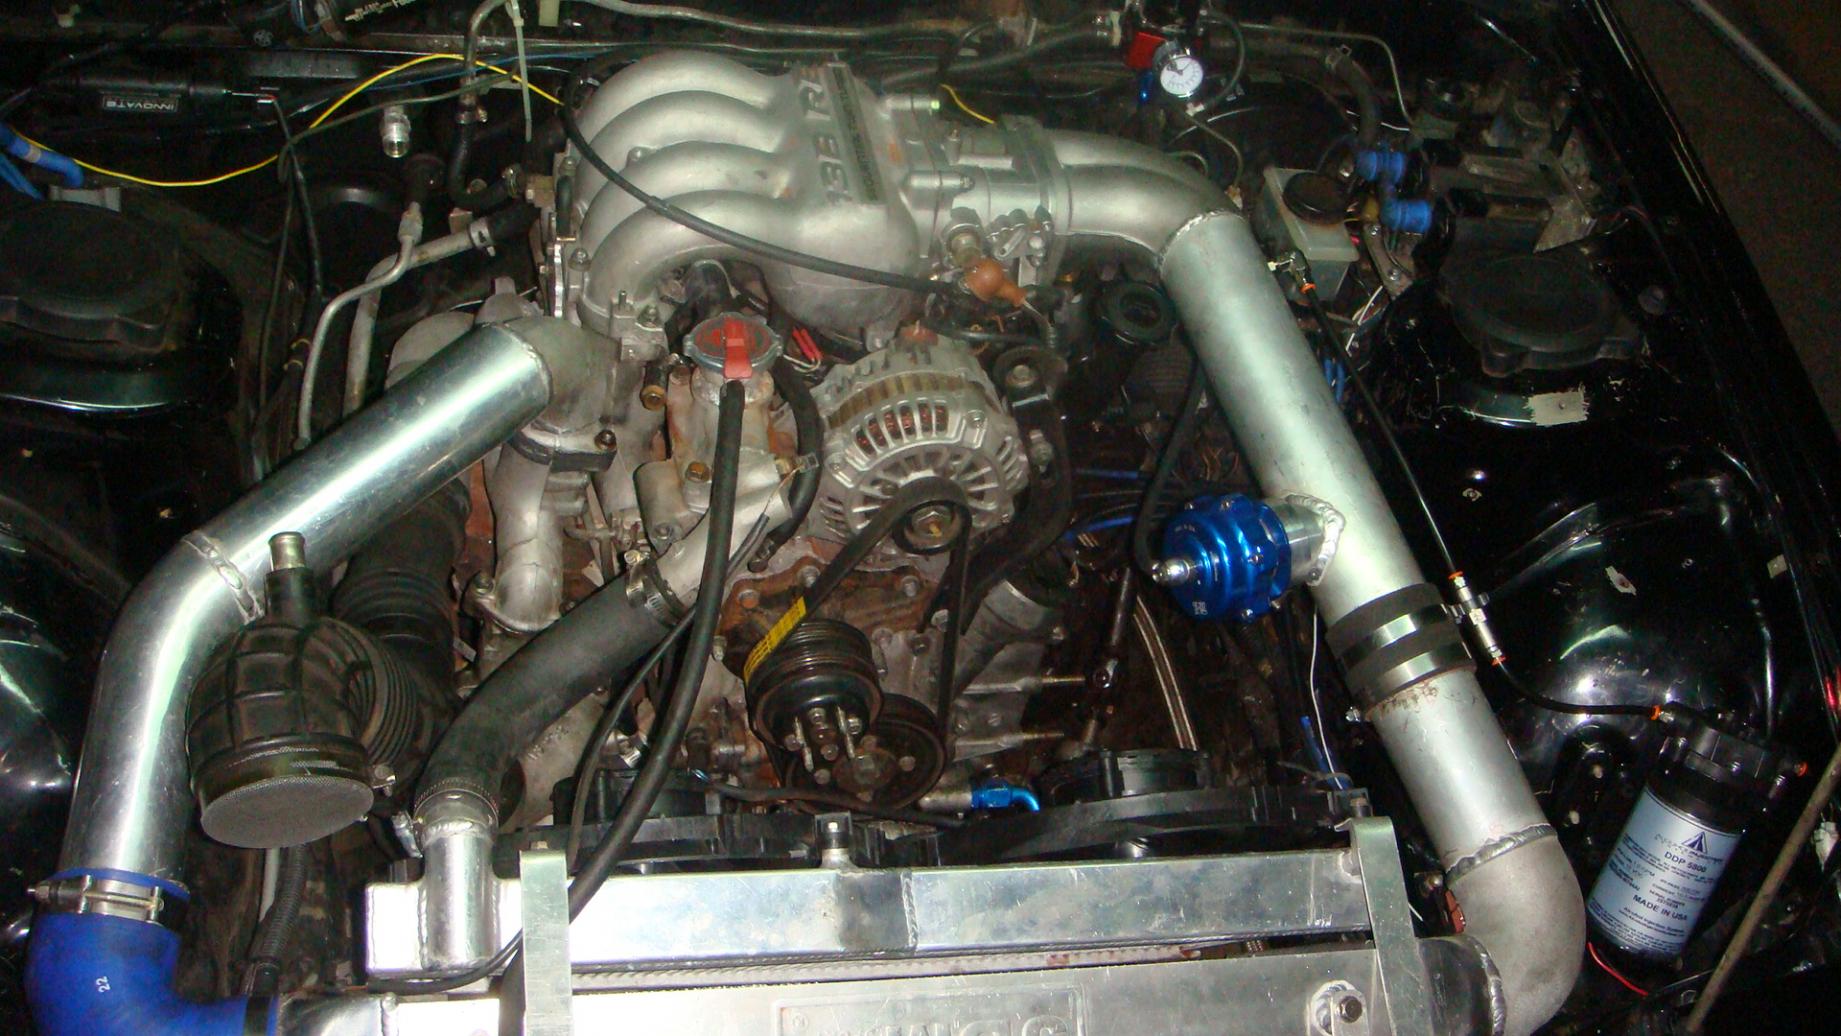 Post pics of your engine bay - Page 5 - RX7Club.com - Mazda RX7 Forum